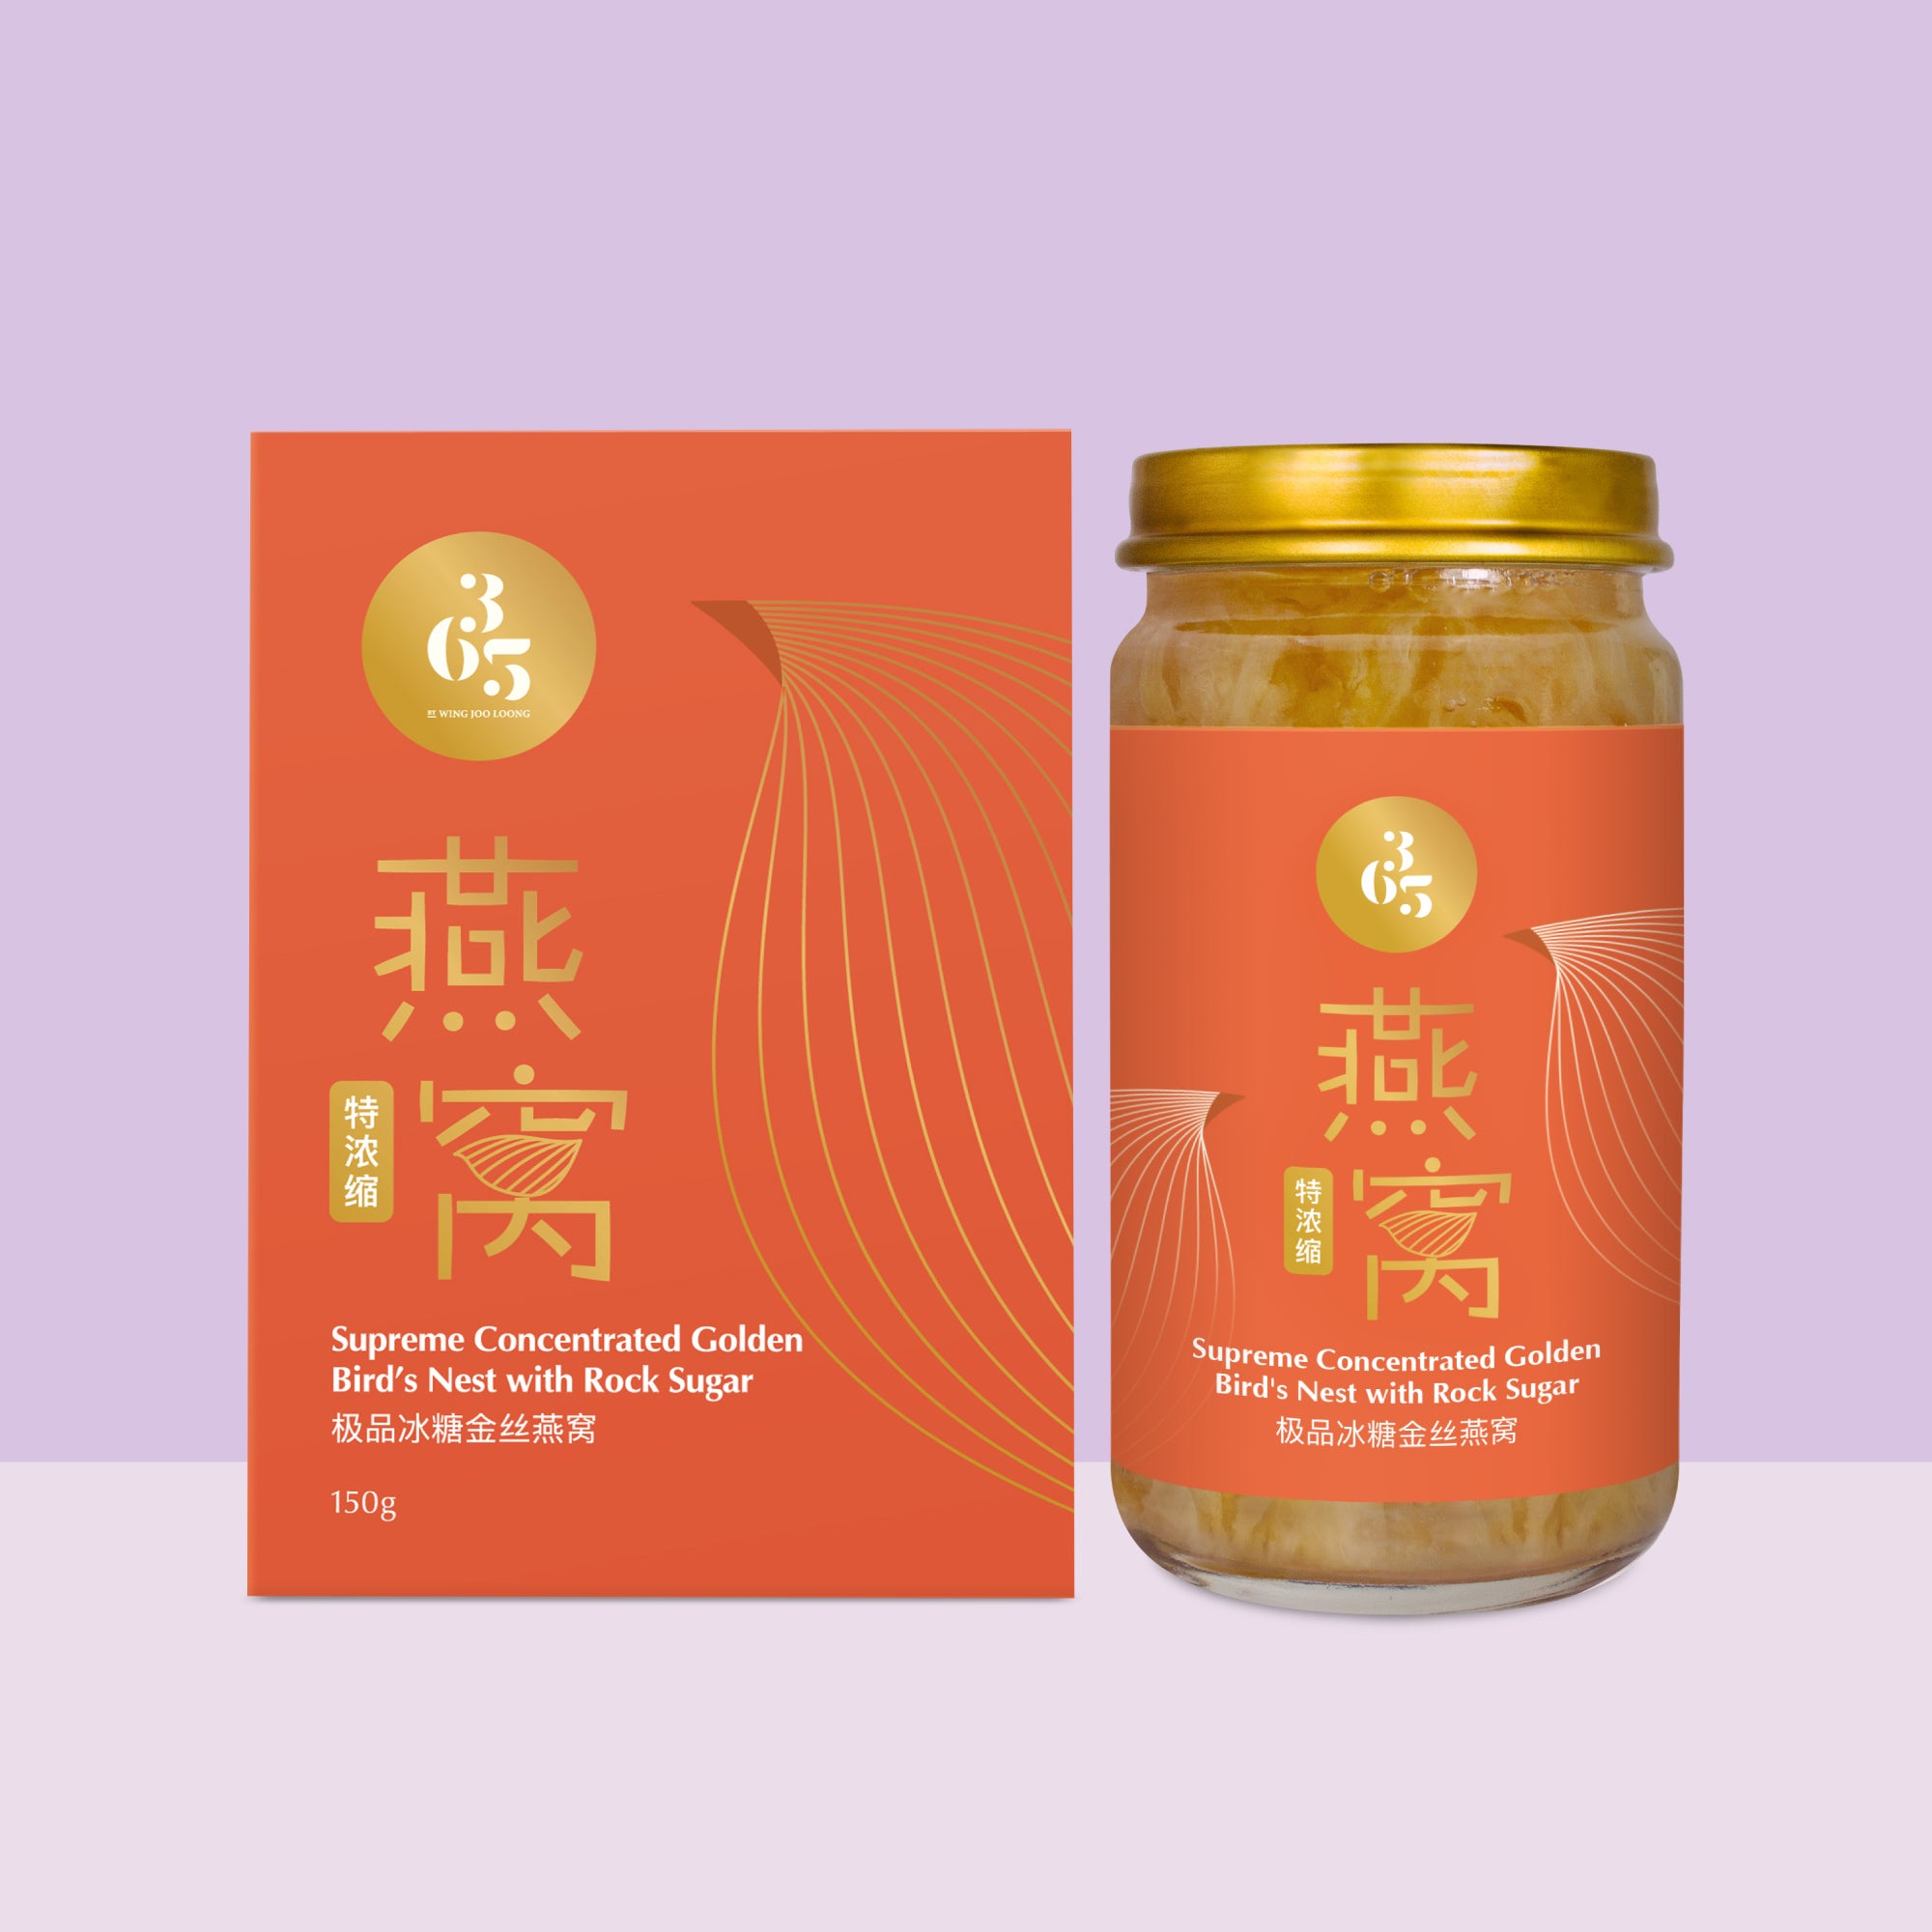 Supreme Concentrated Bird's Nest with Rock Sugar 150g 极品特浓缩燕窝